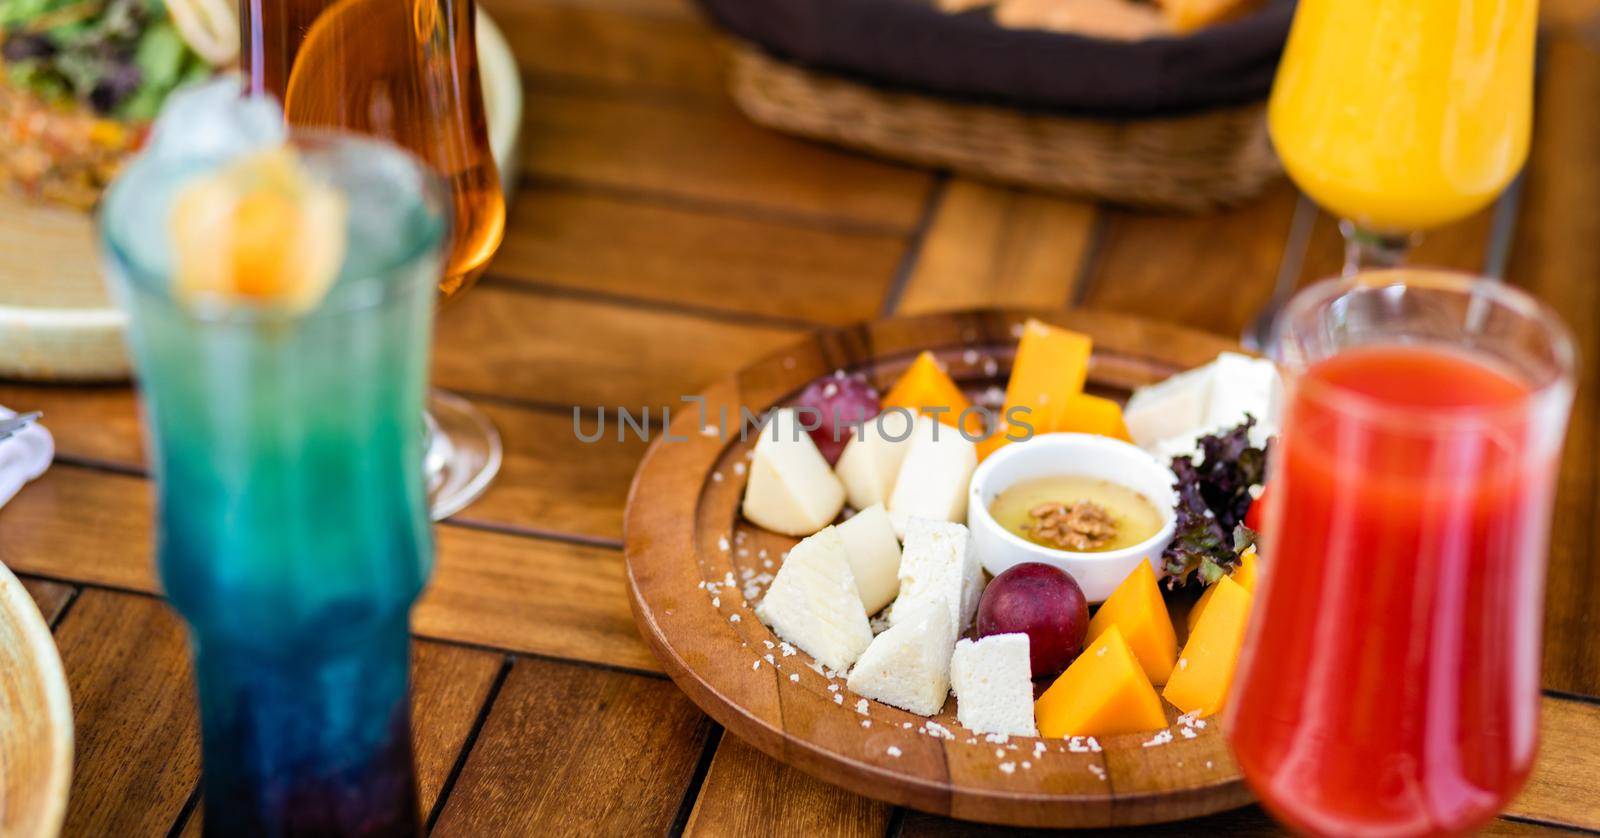 Assorted cheese with sauce on the wooden plate by ferhad